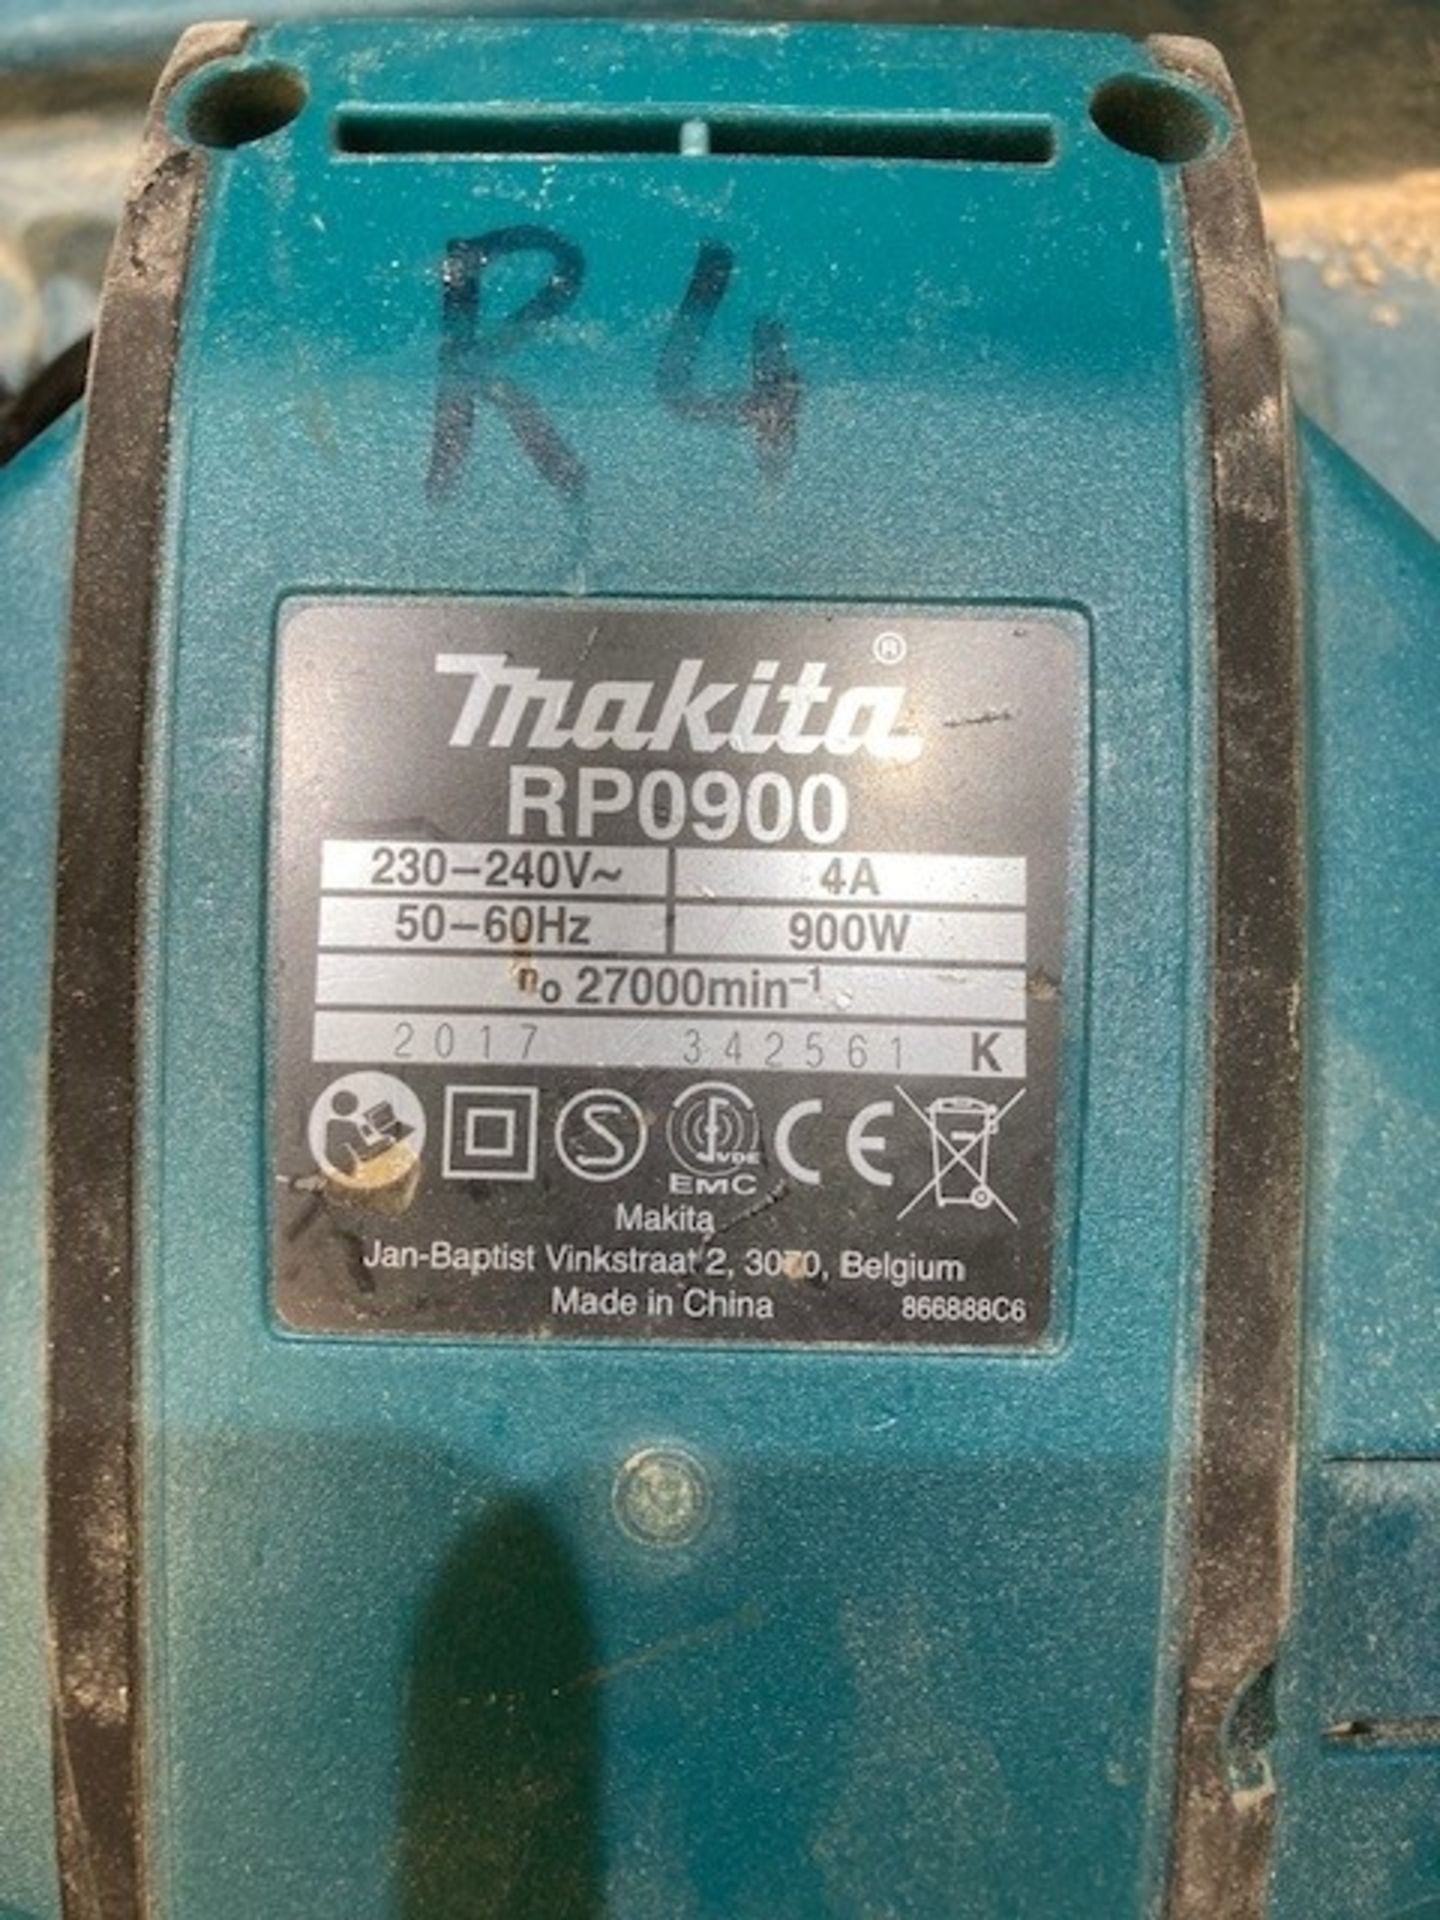 Makita RP0900 1/4" Plunge Router - Image 4 of 4